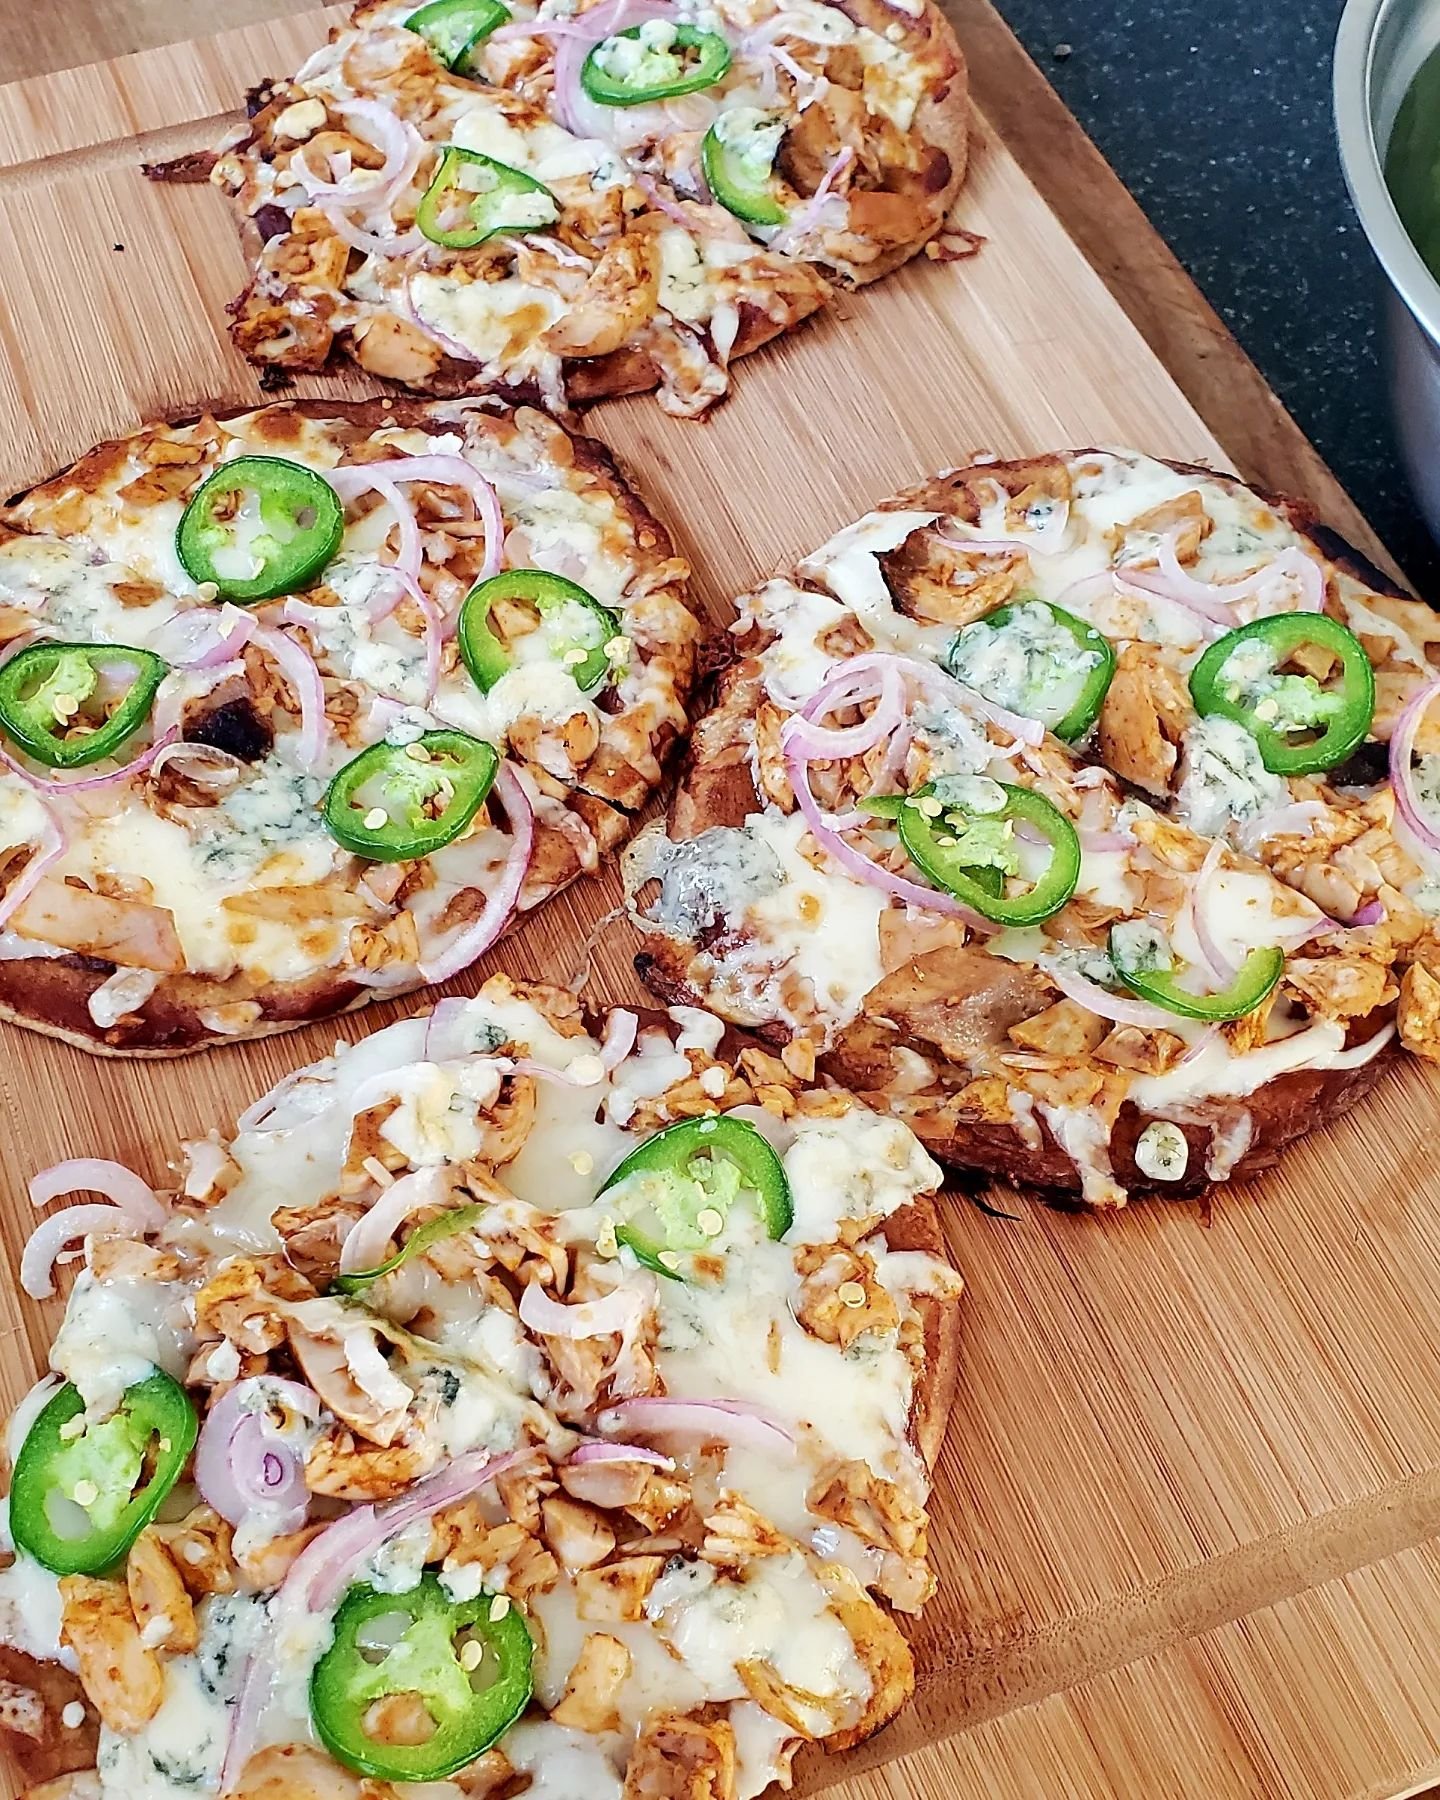 Which is your fave: 1-10? 👇 

⭐️ Save for your own keto meal inspo!

1) BBQ Chicken Naan Flatbread Pizza 

2) Thai Green Curry Chicken 

3) Low Carb Yorkshire Pudding 

4) Spicy Beef &amp; Broccoli

5) Egg Bake w/ soppressata, grated zucchini + mozz